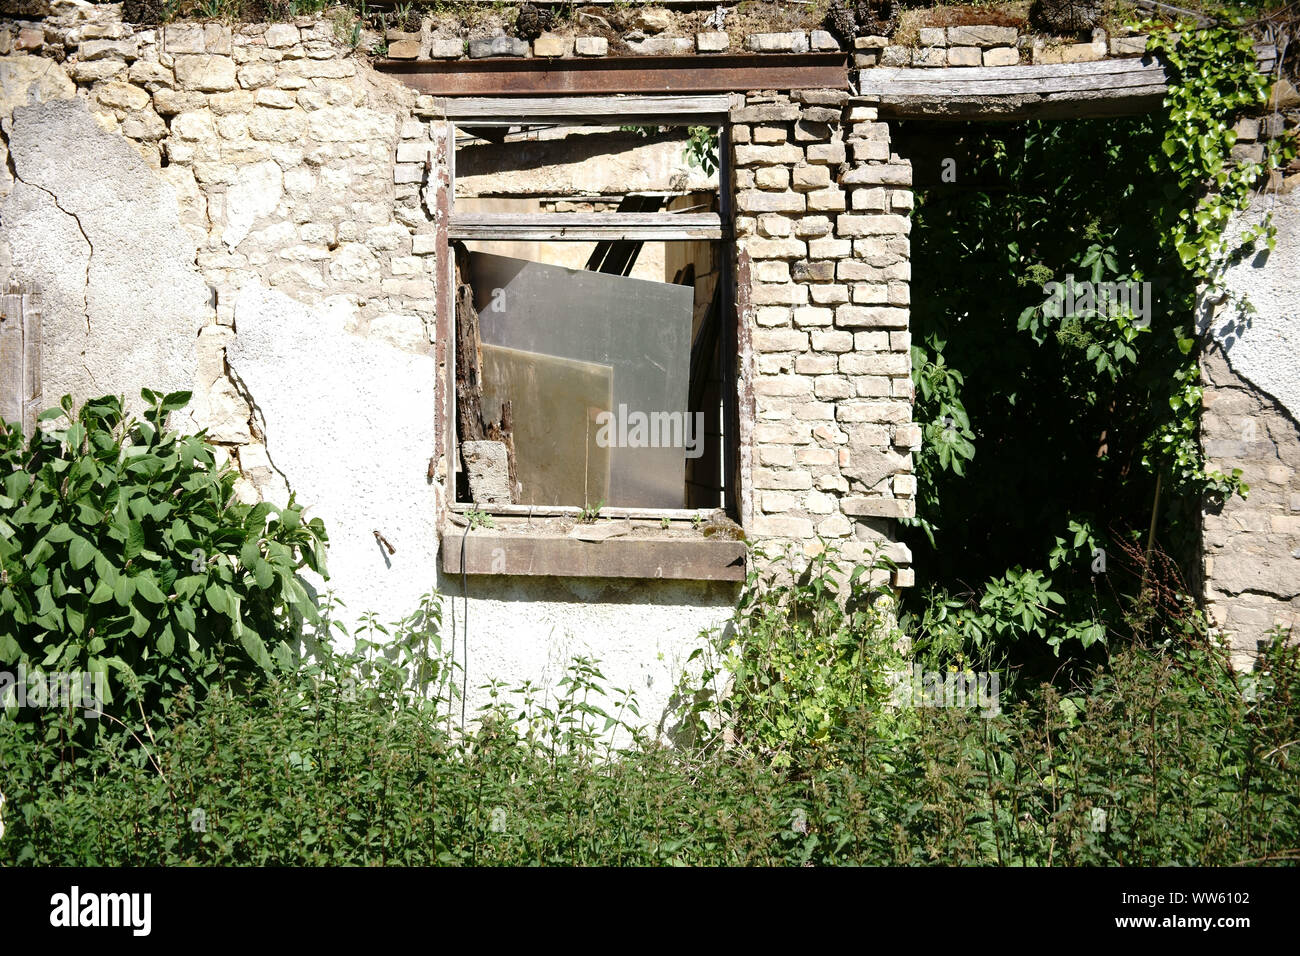 A wall of a house in danger of collapsing overgrown with plants, Stock Photo